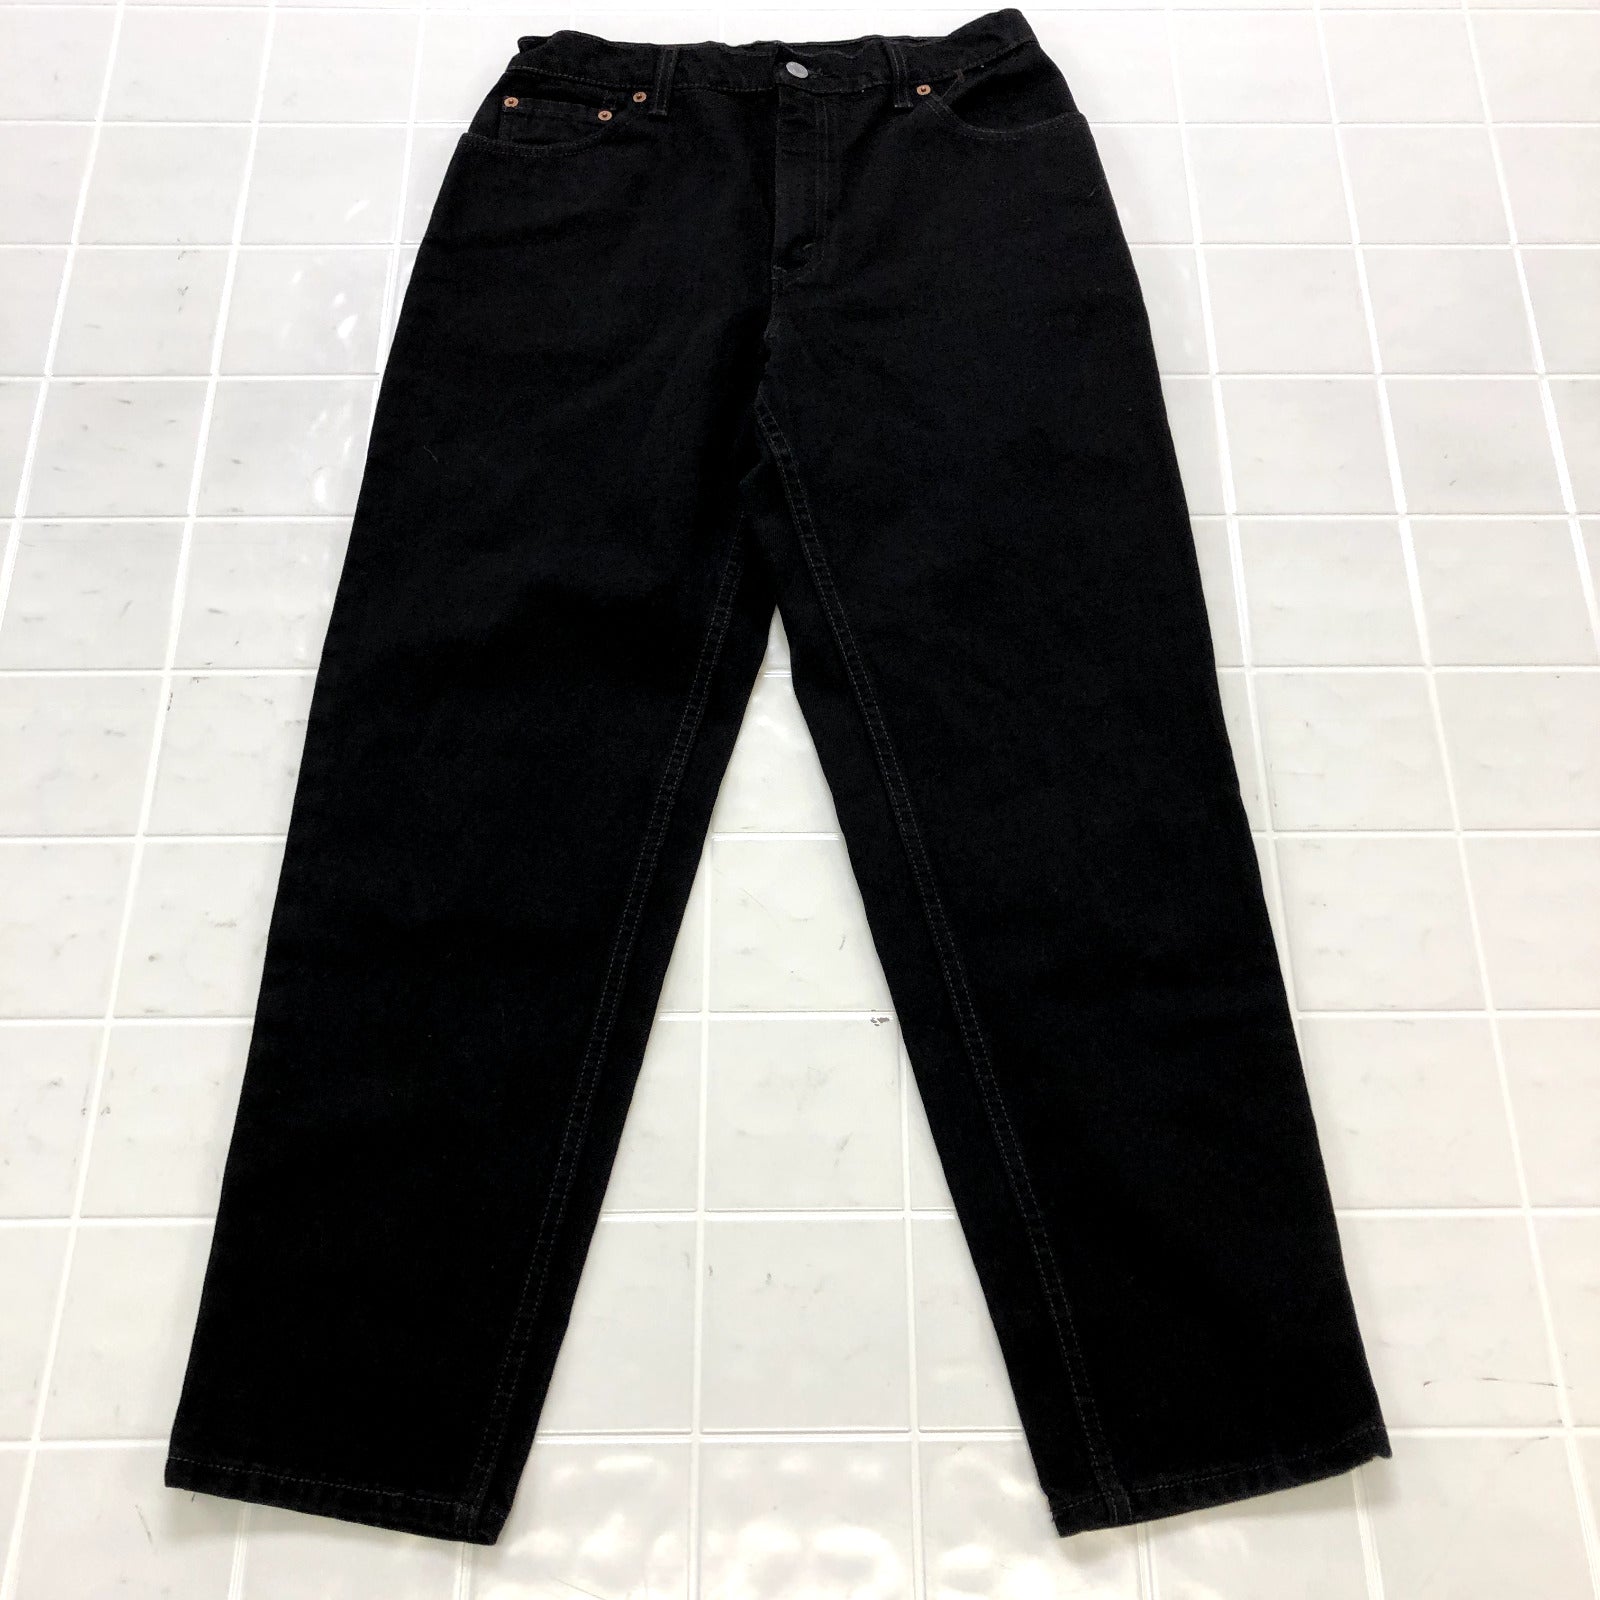 Vintage Levi's 550 Black Denim Flat Front Chino Tapered Jeans Women's Size 12